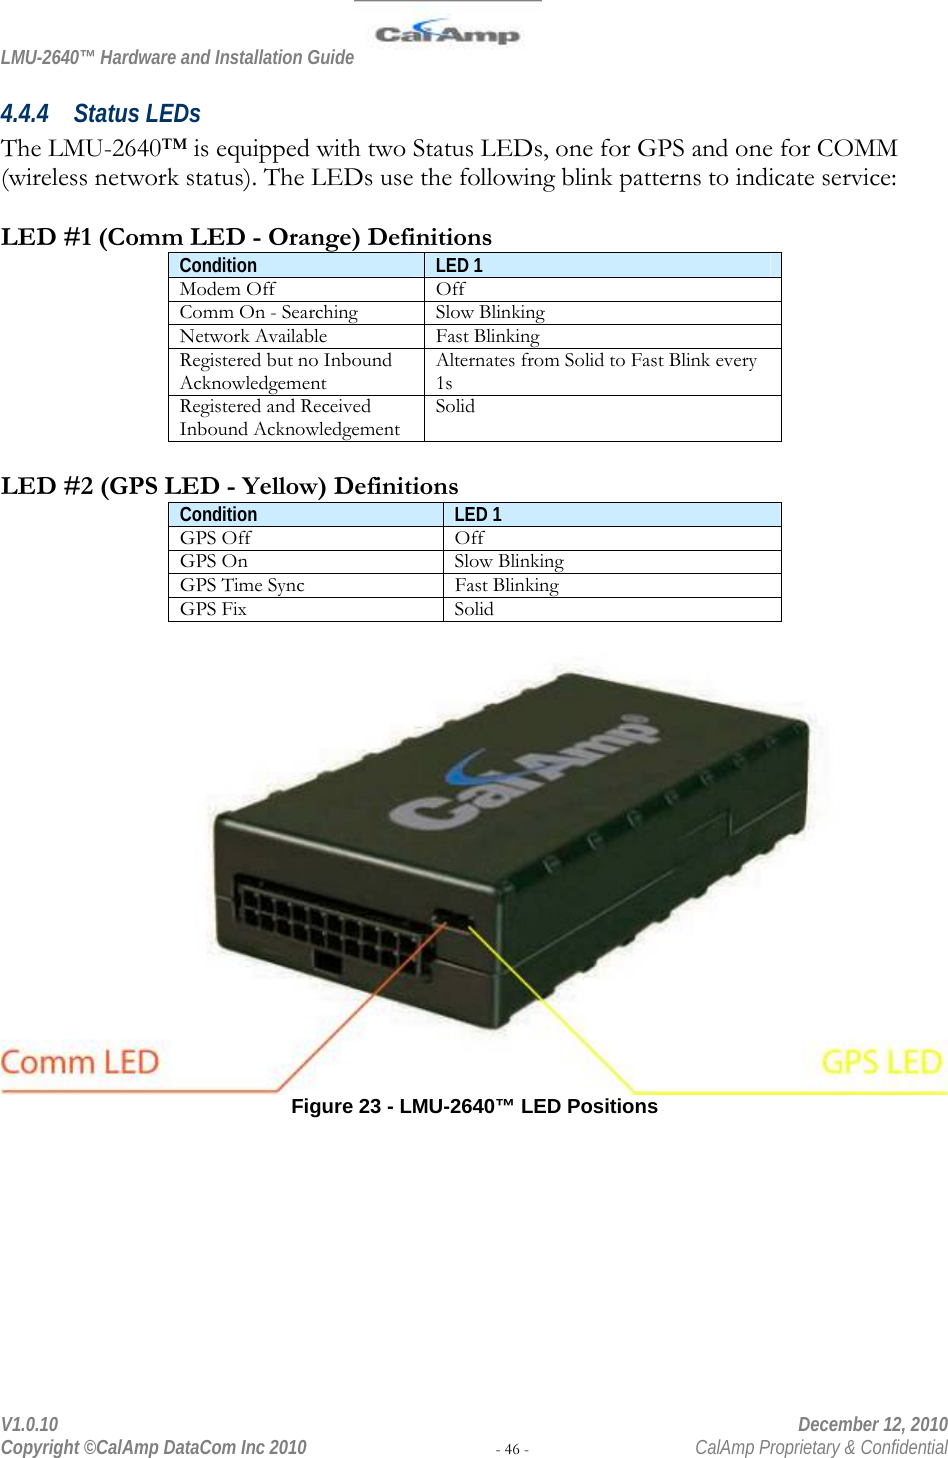 LMU-2640™ Hardware and Installation Guide  V1.0.10    December 12, 2010 Copyright ©CalAmp DataCom Inc 2010 - 46 -  CalAmp Proprietary &amp; Confidential 4.4.4 Status LEDs The LMU-2640™ is equipped with two Status LEDs, one for GPS and one for COMM (wireless network status). The LEDs use the following blink patterns to indicate service:  LED #1 (Comm LED - Orange) Definitions Condition  LED 1 Modem Off  OffComm On - Searching  Slow BlinkingNetwork Available  Fast BlinkingRegistered but no Inbound Acknowledgement Alternates from Solid to Fast Blink every 1sRegistered and Received Inbound Acknowledgement Solid LED #2 (GPS LED - Yellow) Definitions Condition  LED 1 GPS Off OffGPS On  Slow BlinkingGPS Time Sync  Fast BlinkingGPS Fix  Solid  Figure 23 - LMU-2640™ LED Positions  